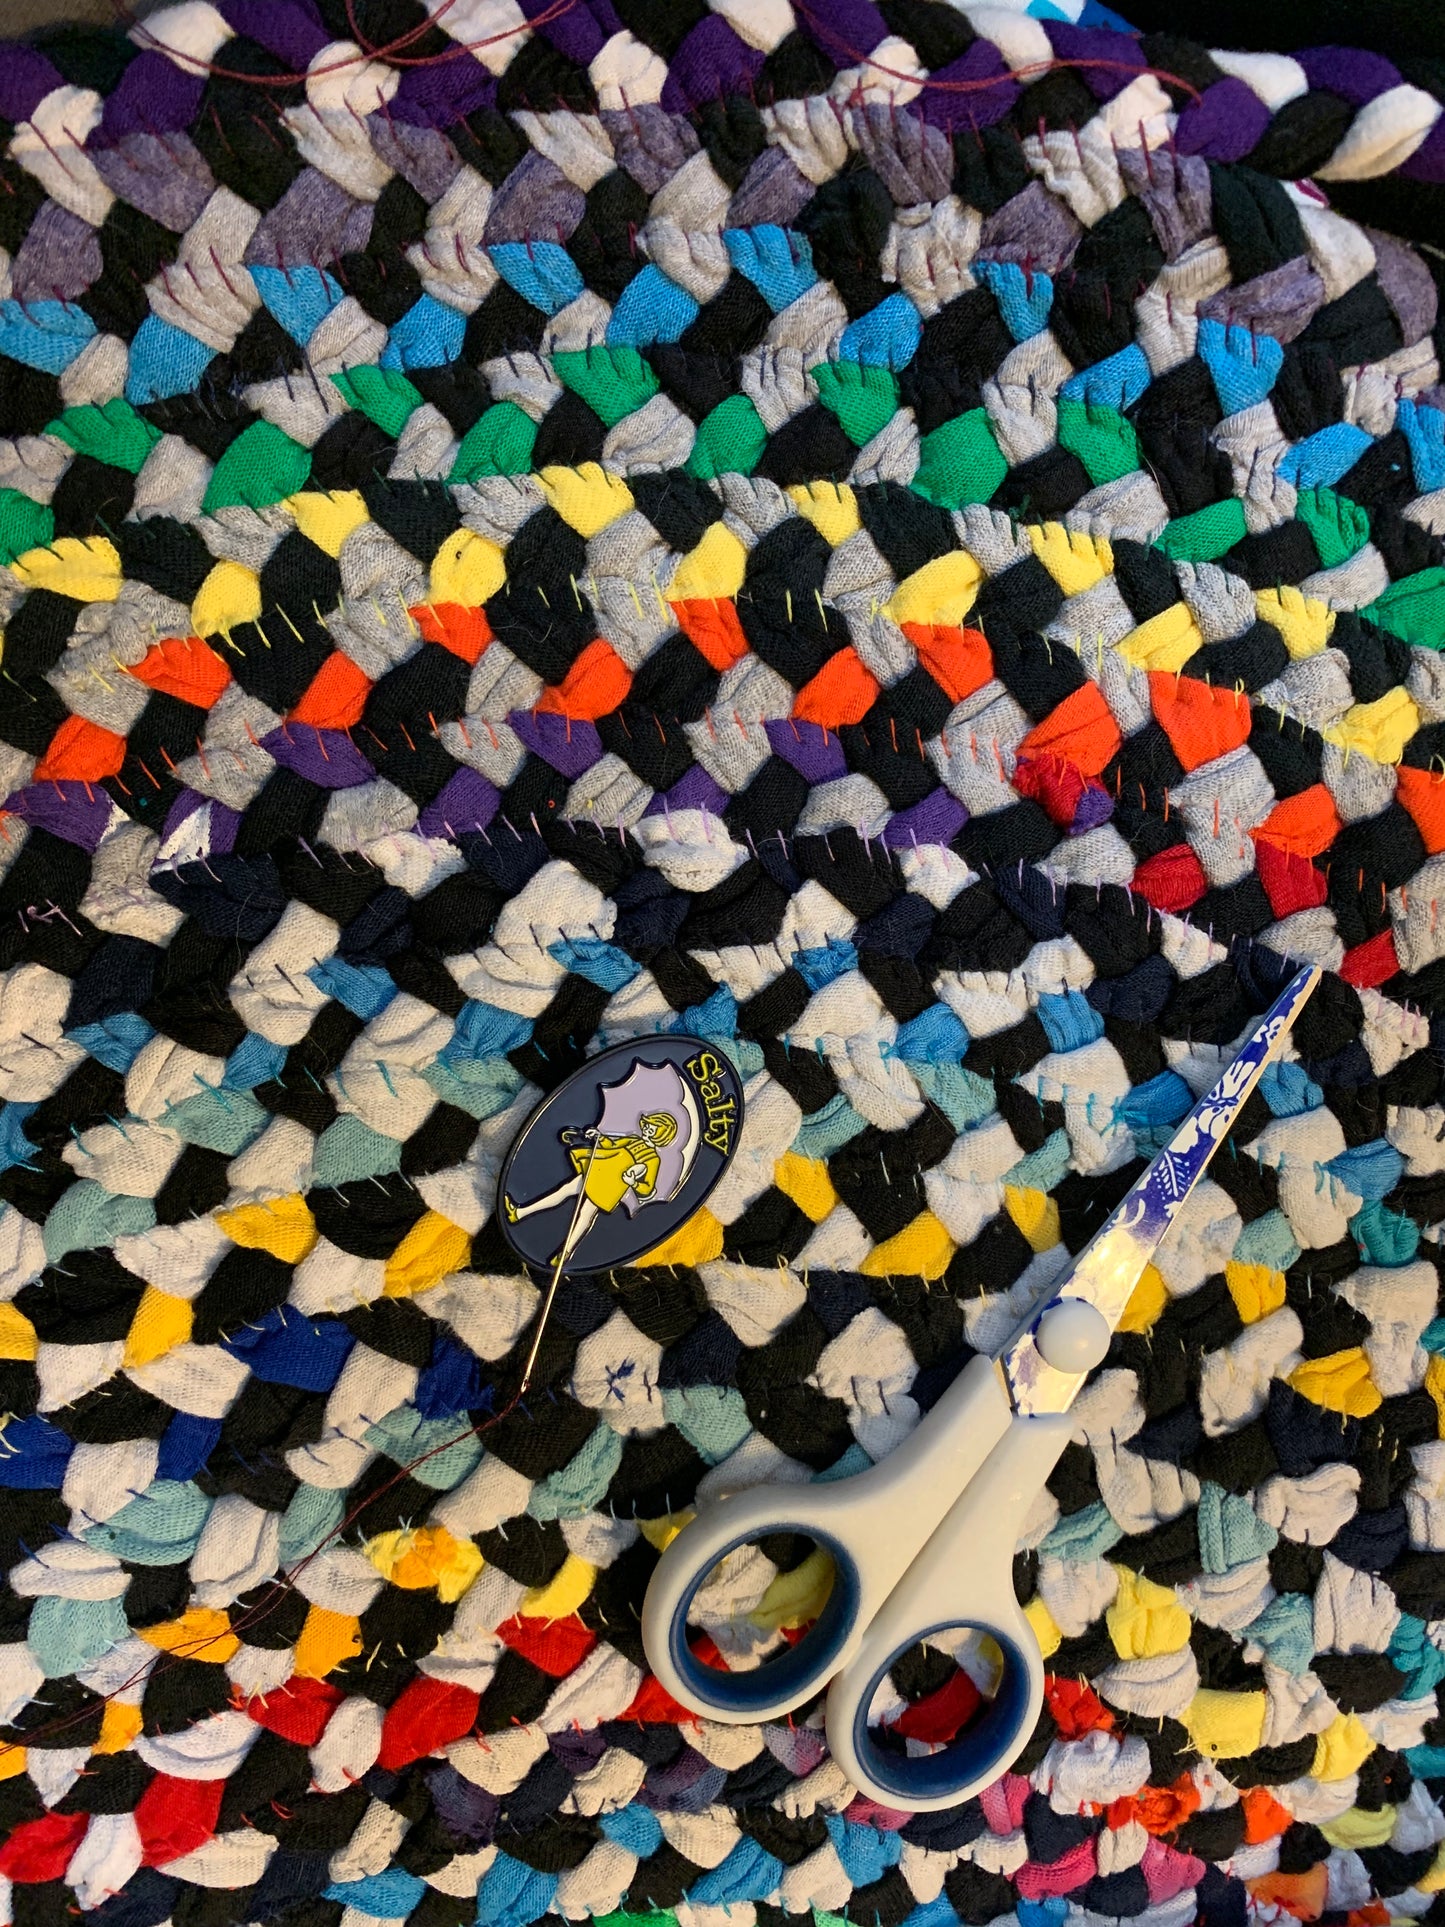 Rug in progress, pictured with a pair of scissors, a needle minder holding a needle with purple thread. The back stitches are coordinating with the braid color. 